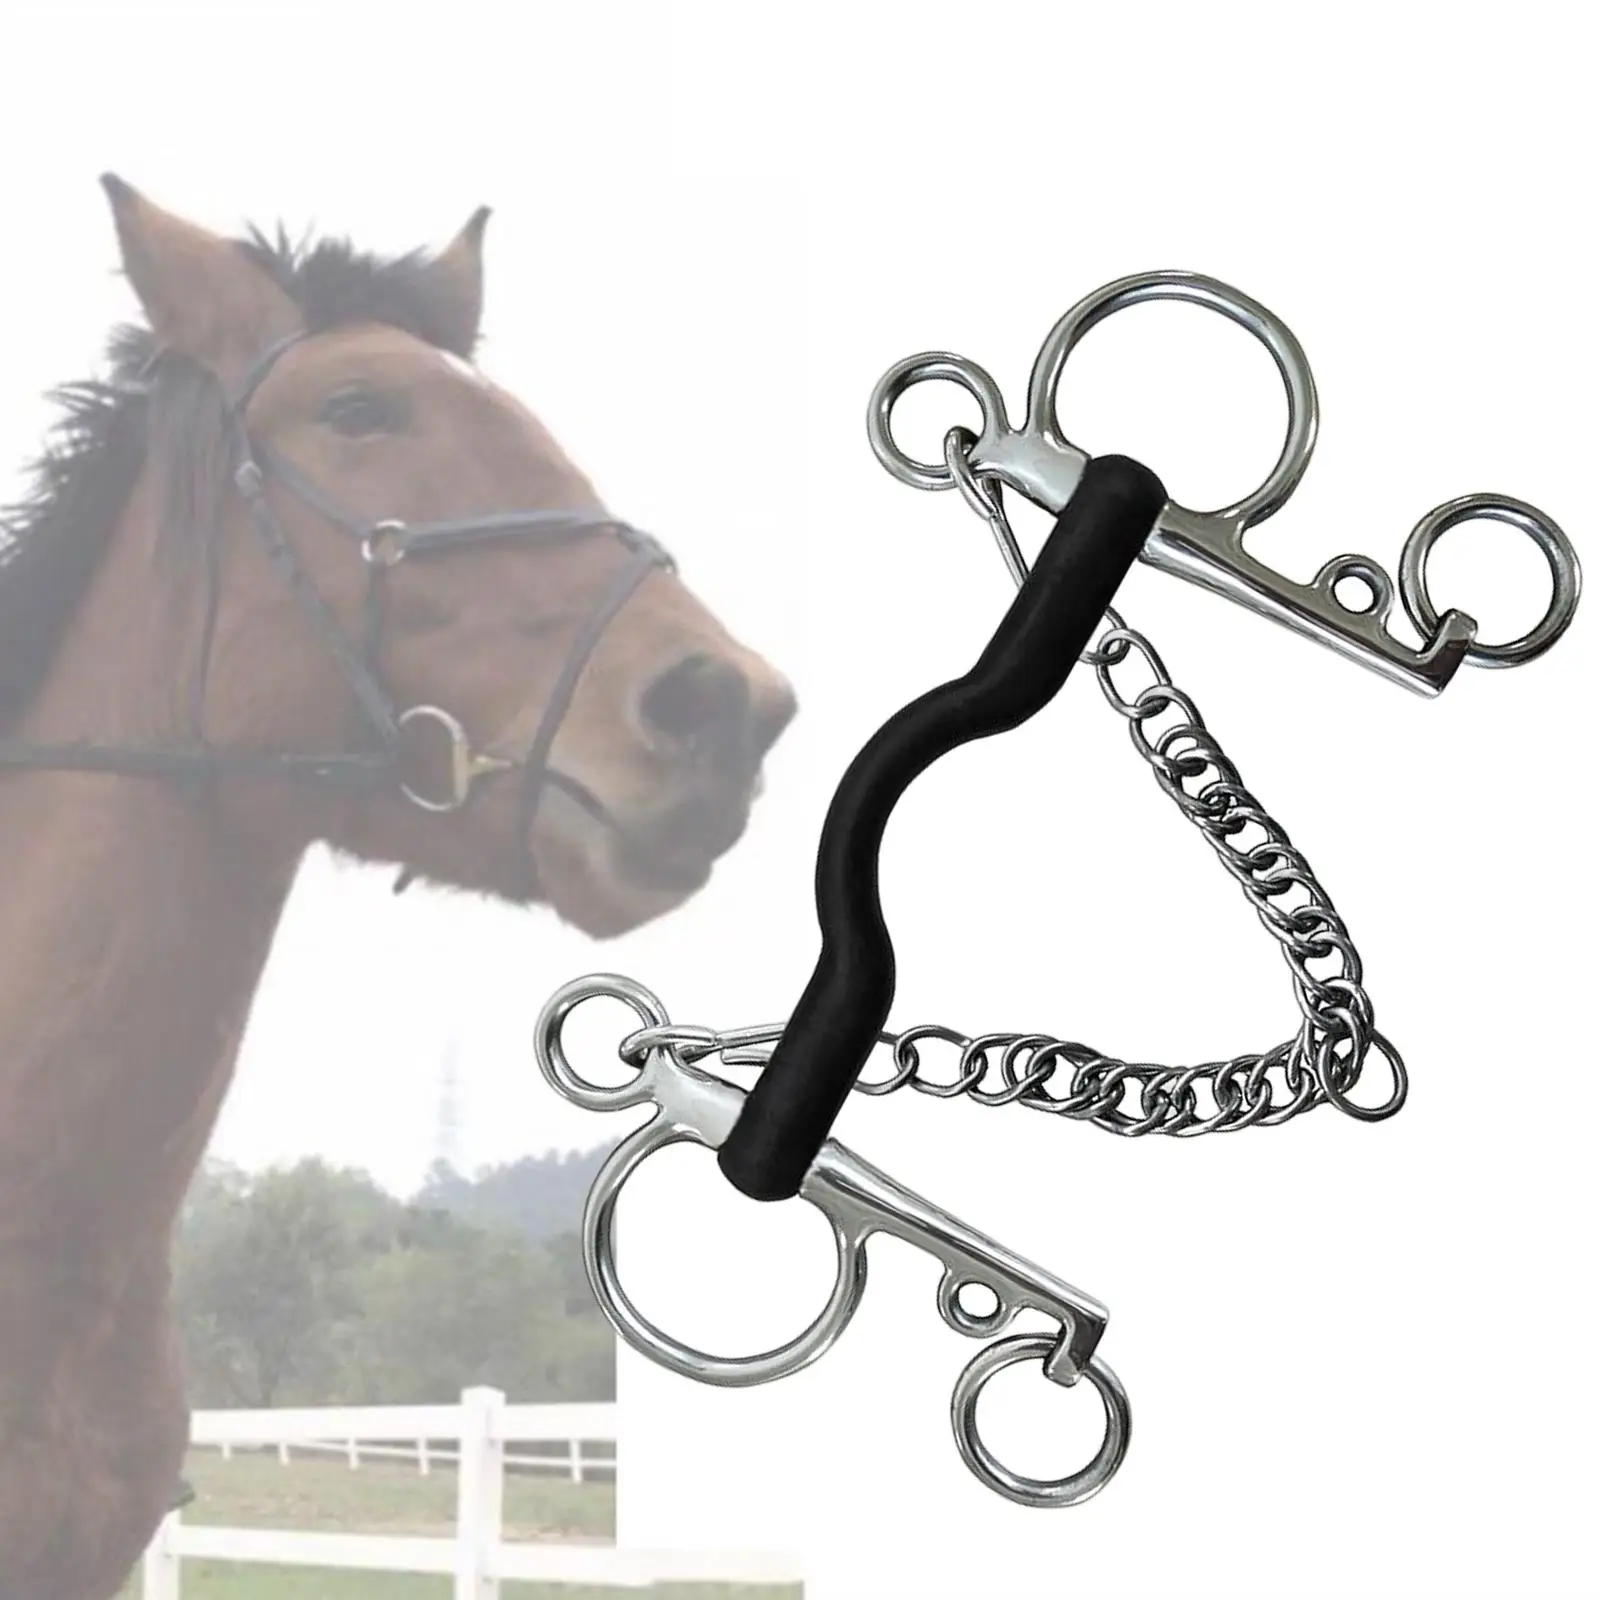 Western Style Horse Bit W/Curb Hooks Chain Horse Bit Mouth with Trims Cheek for Horse Bridle Training Equipment